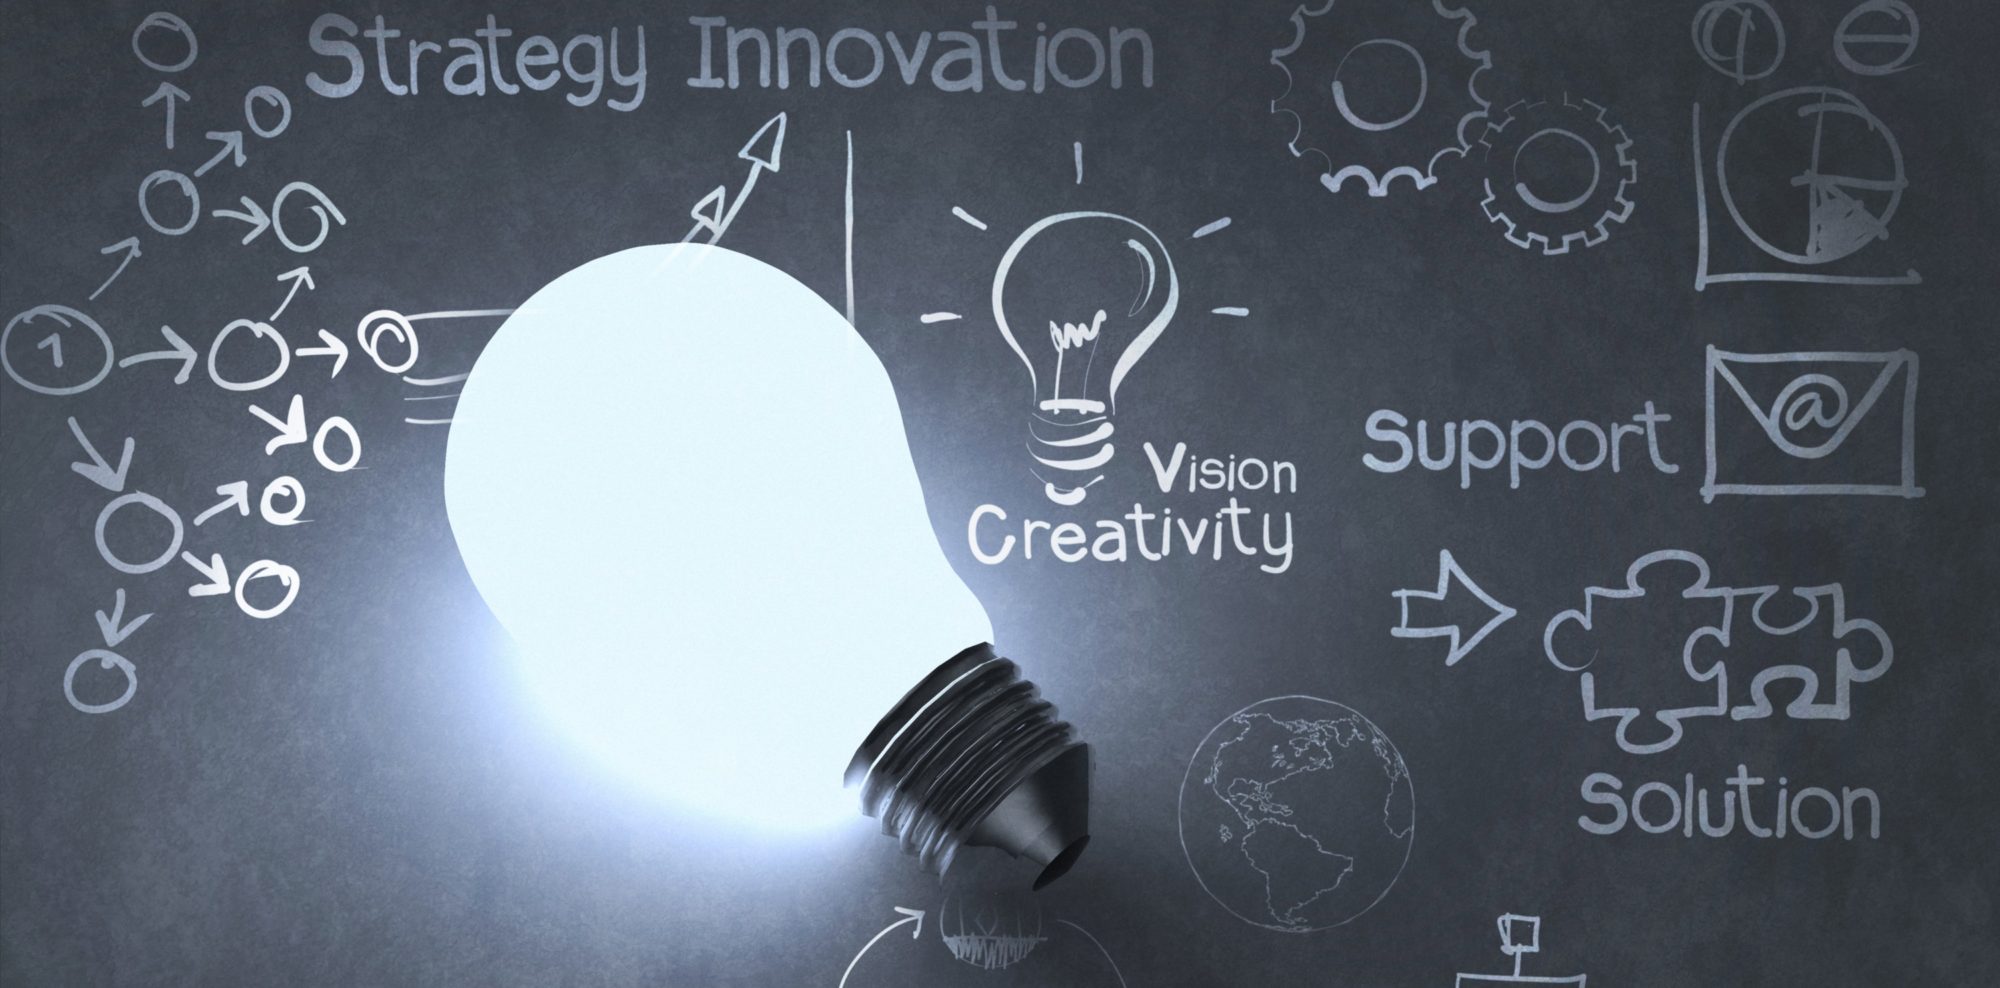 What misconceptions do people have about innovation and creativity?